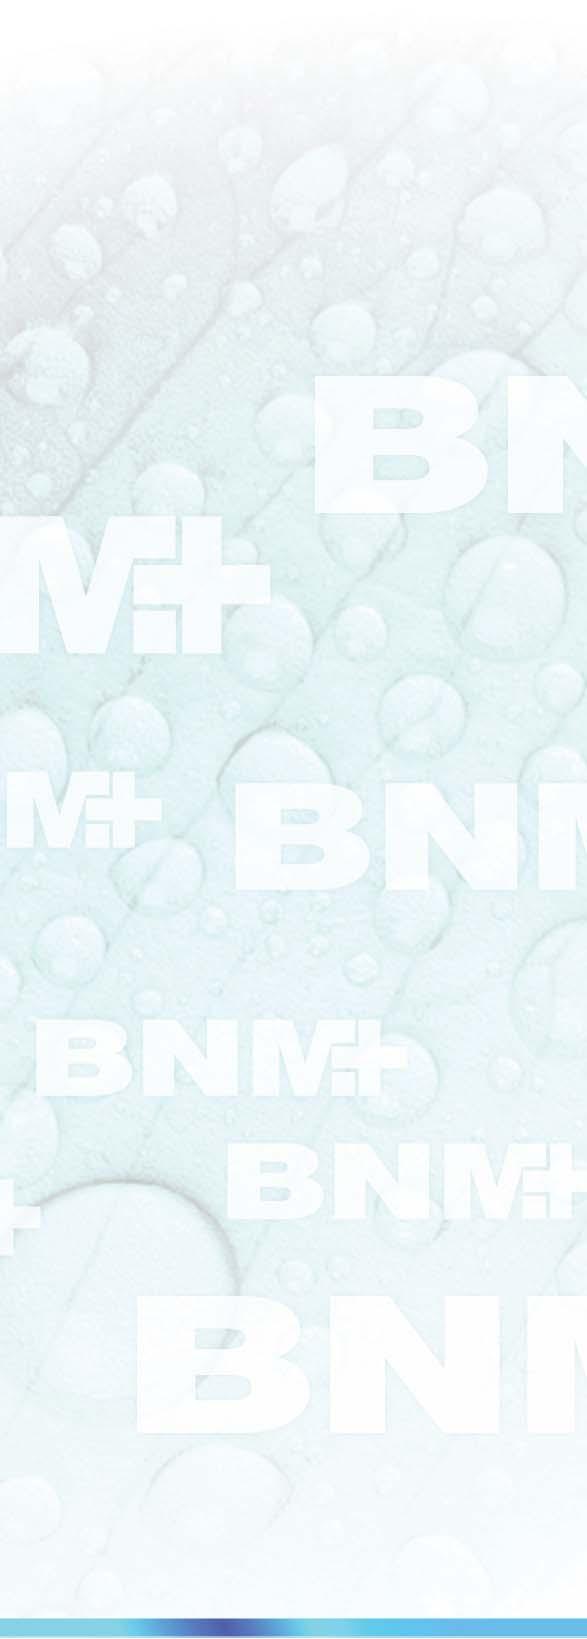 About BNM The BNM was created with a focus on manufacturing and developing high-quality health care